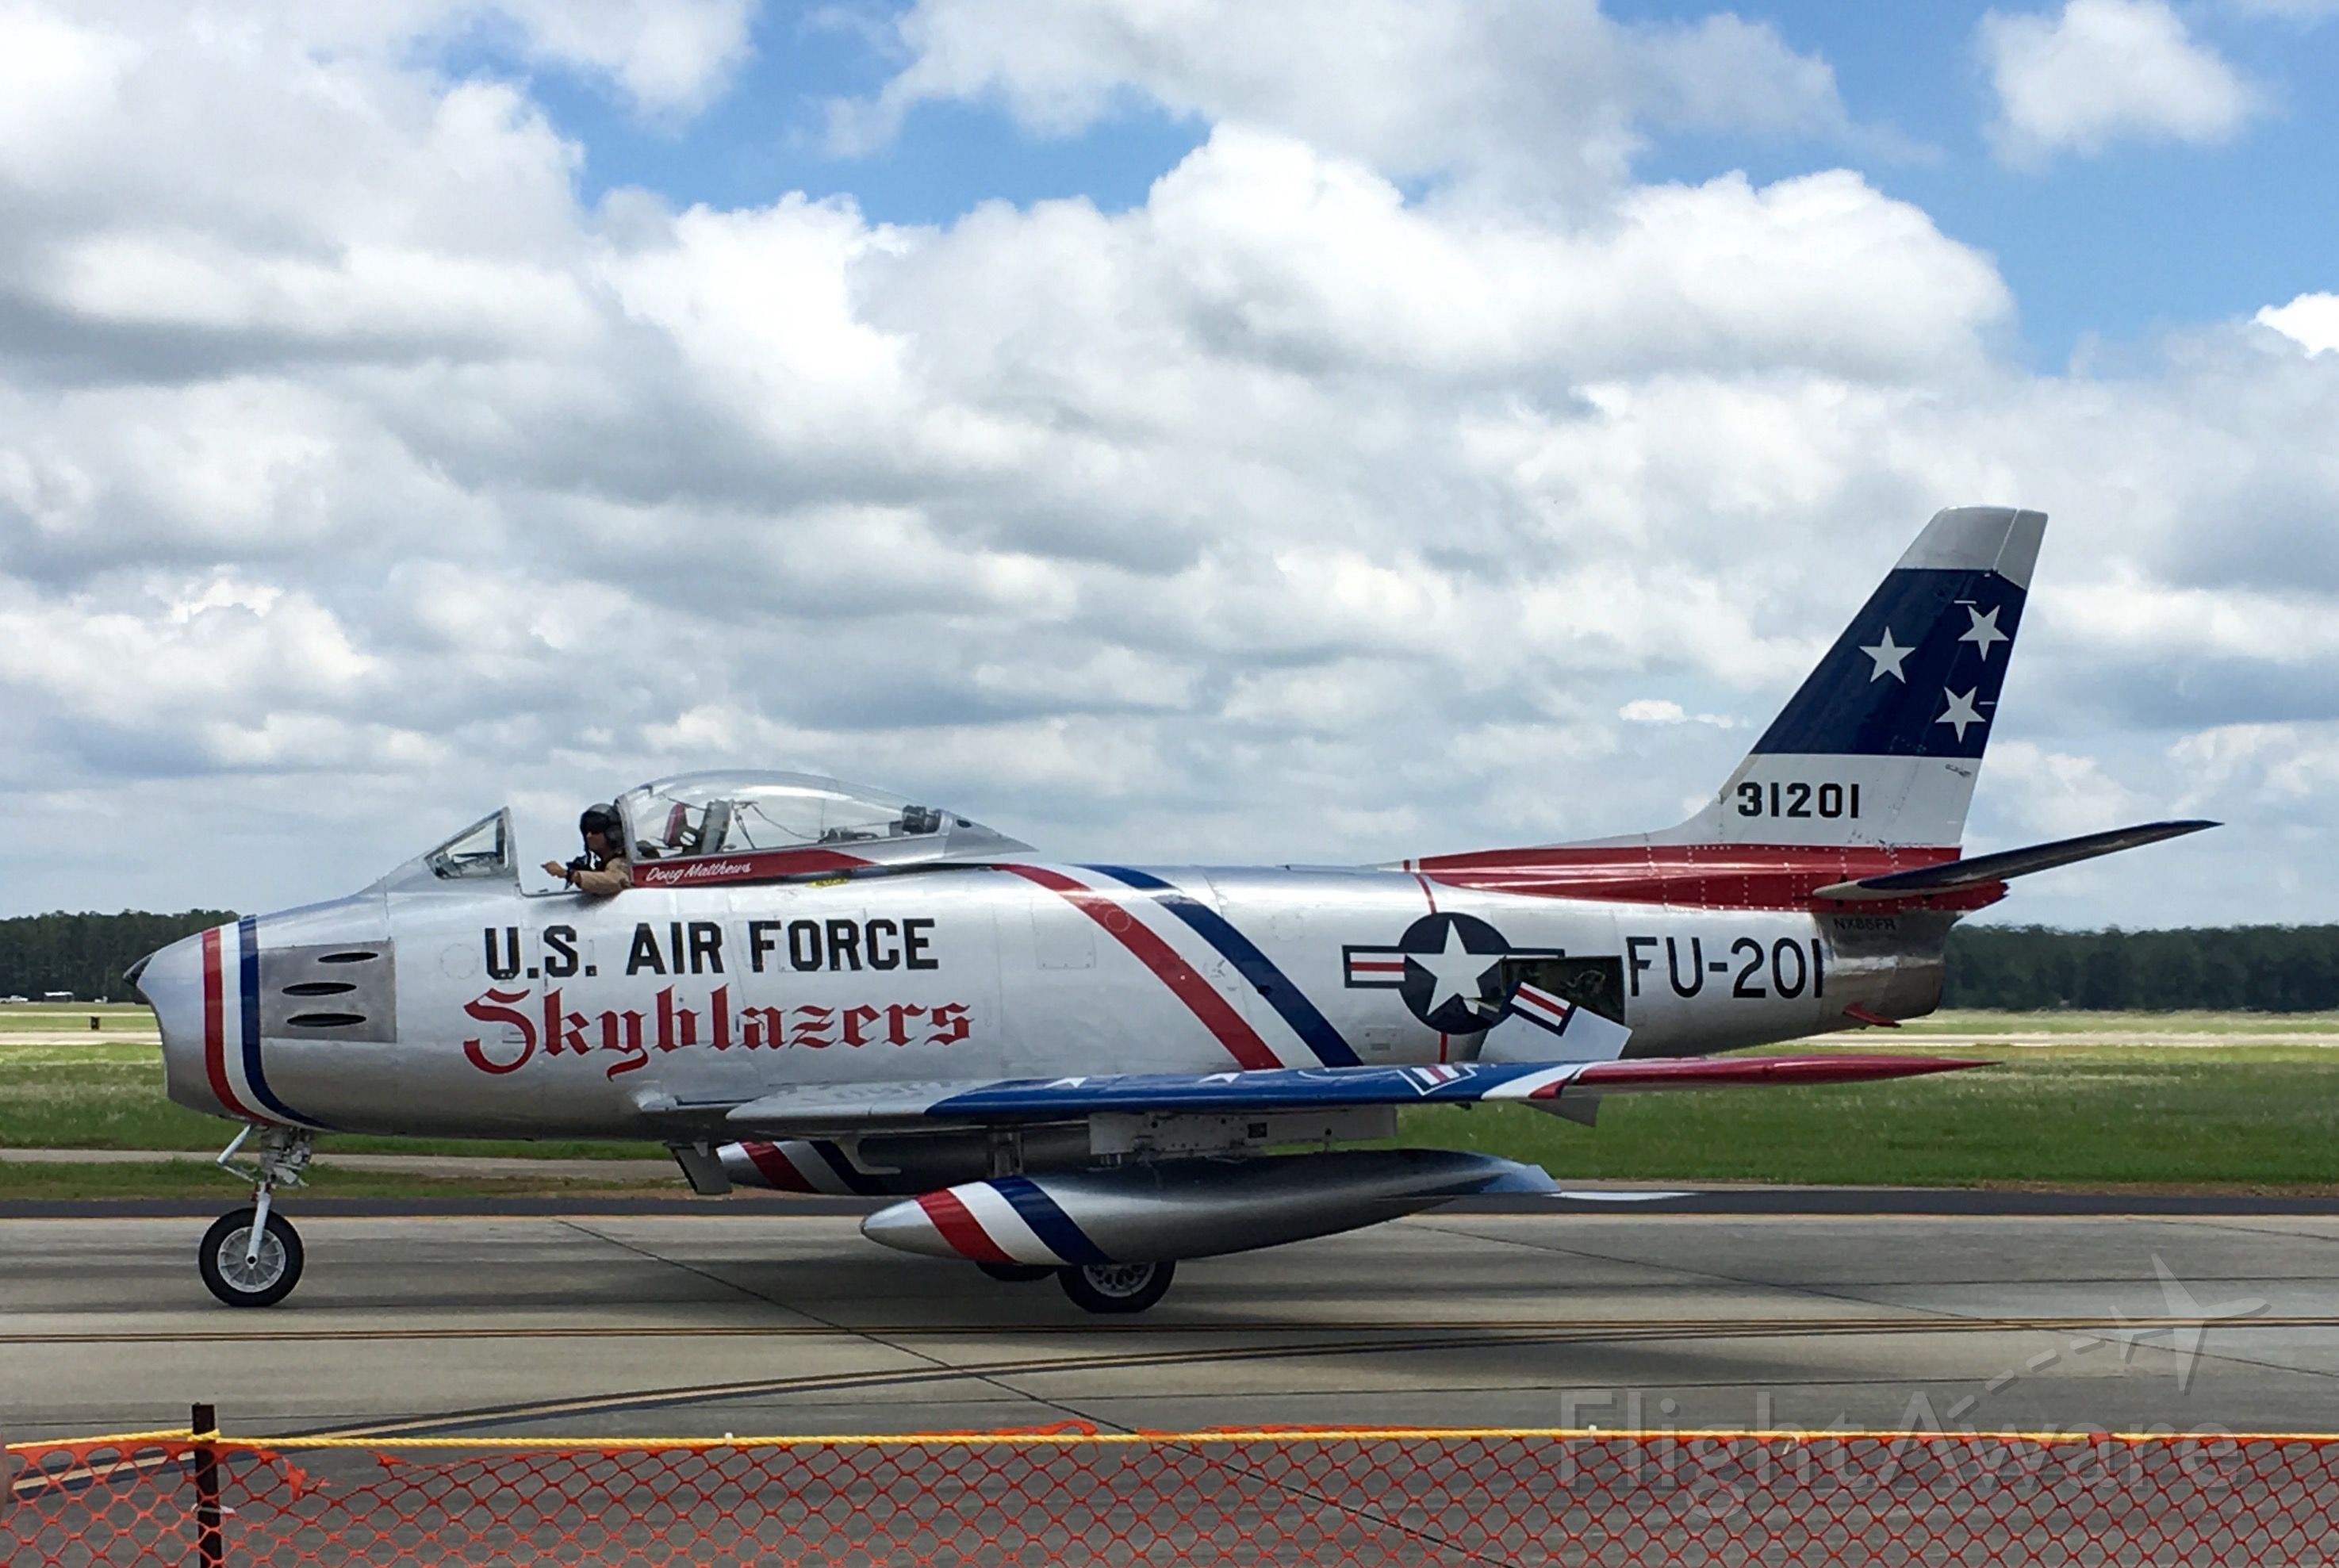 North American F-86 Sabre (FZA201) - Just after its demonstration at Shaw Air Expo 2016!